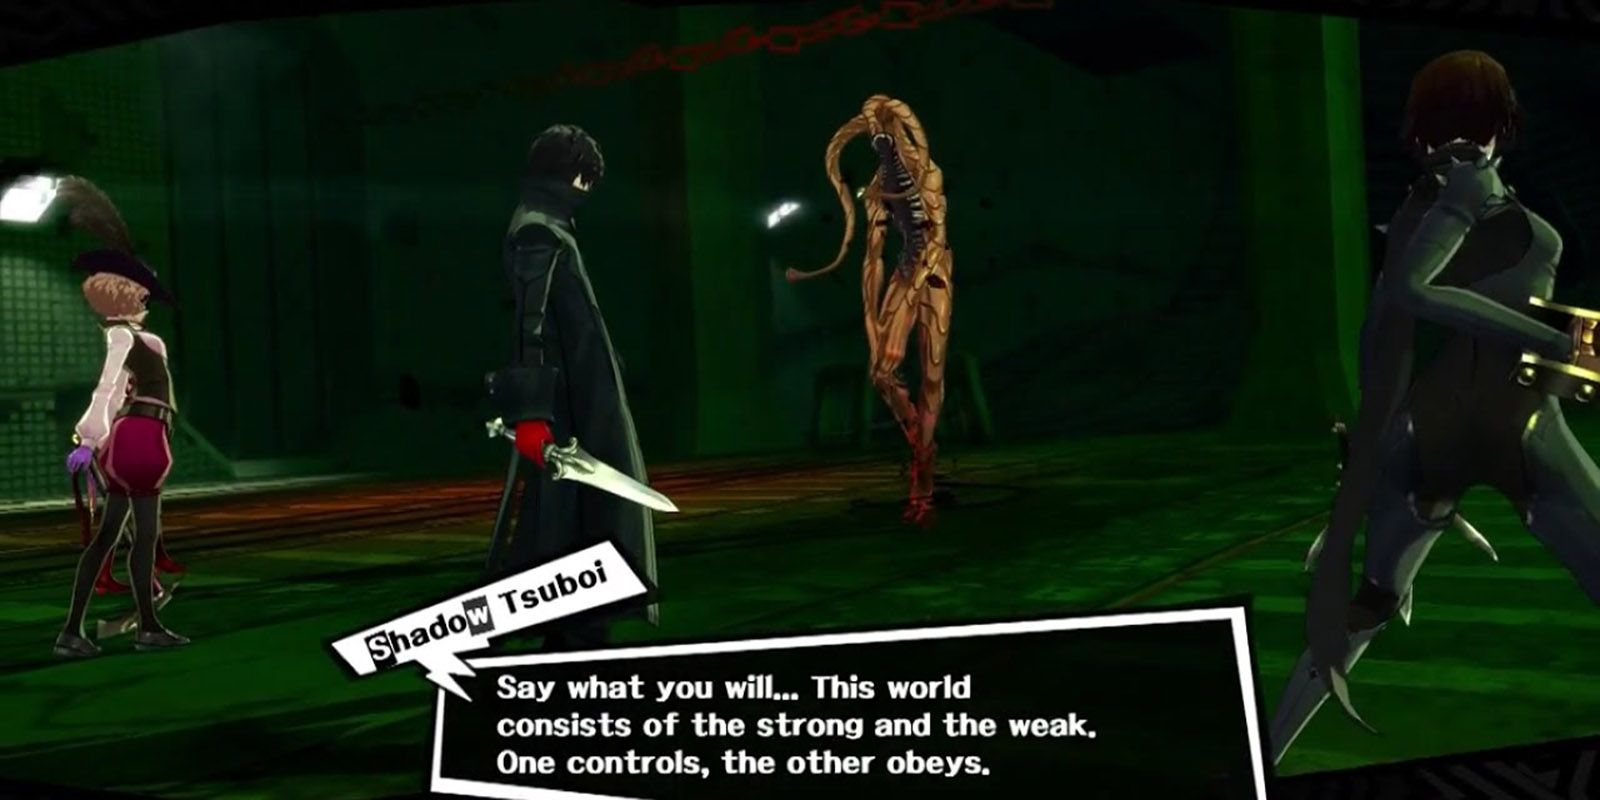 Persona 5 Calling For Justice For Cats